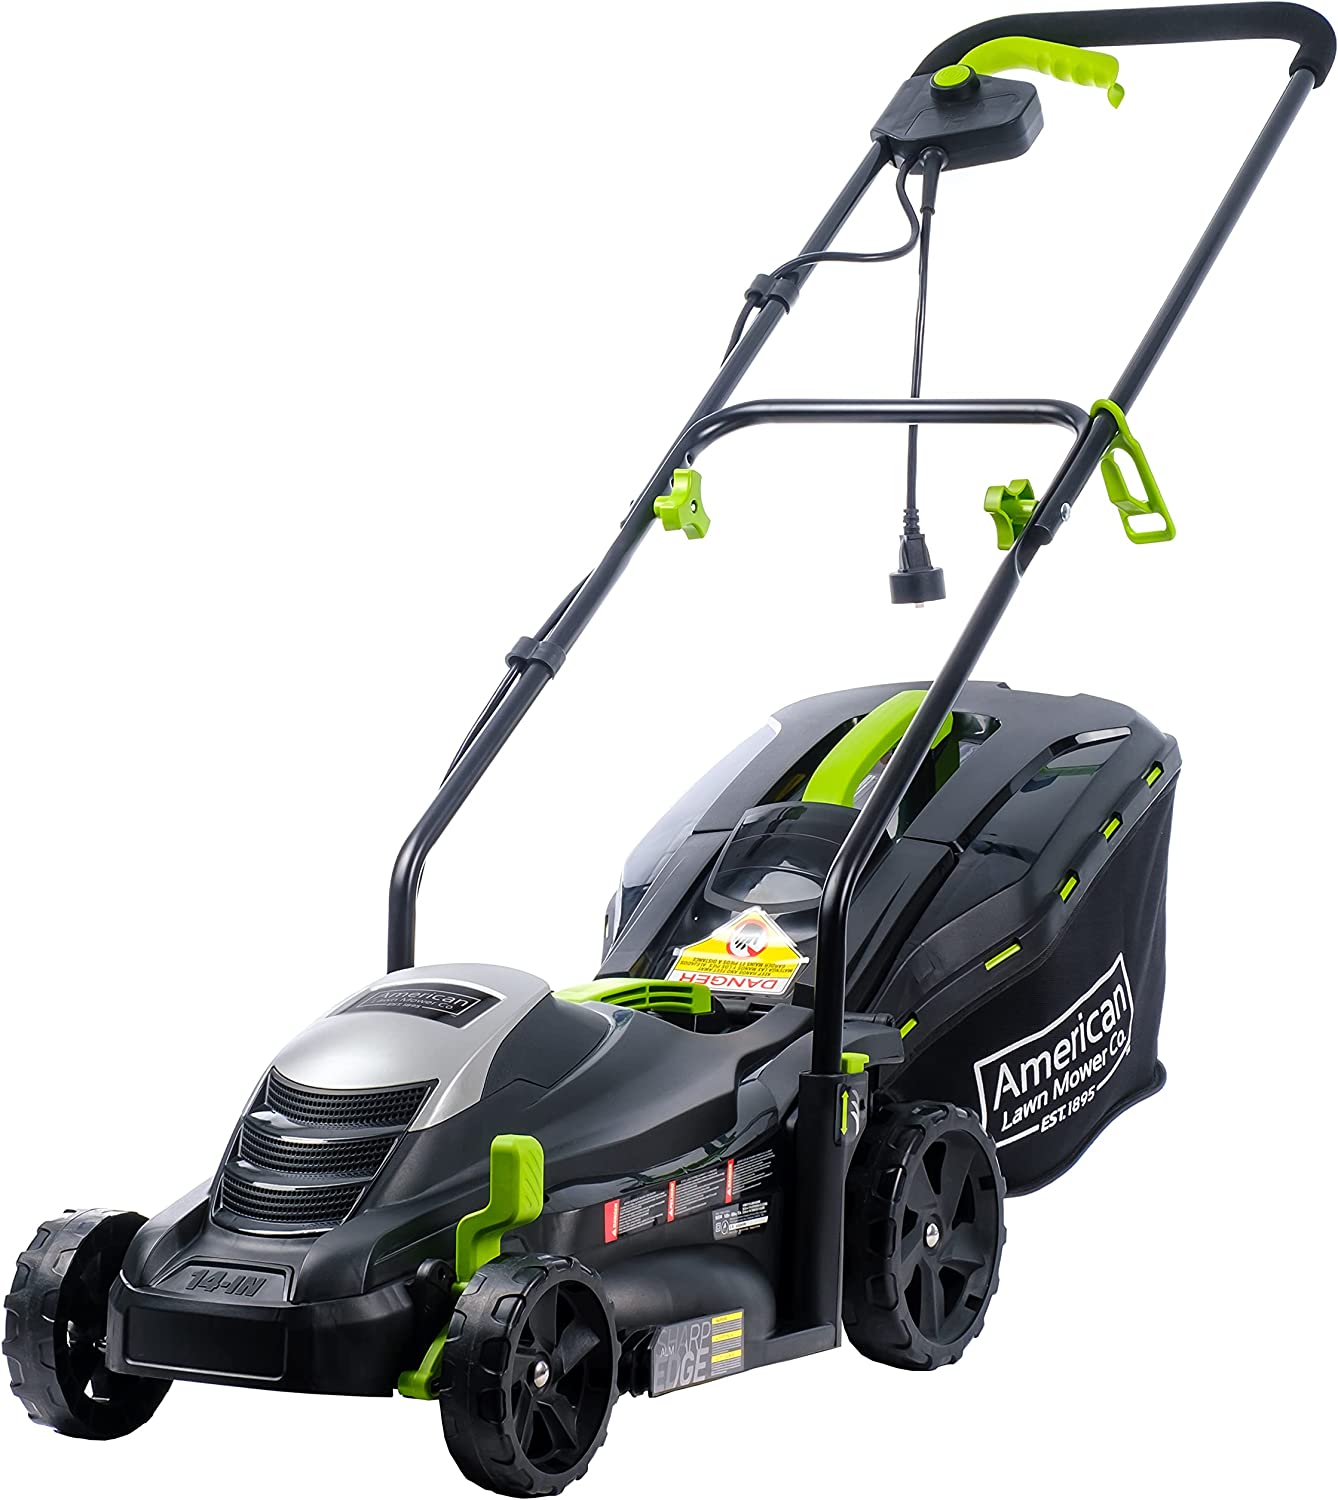 American Lawn Mower Company Corded Electric Lawn Mower – Just $136.58 at Amazon